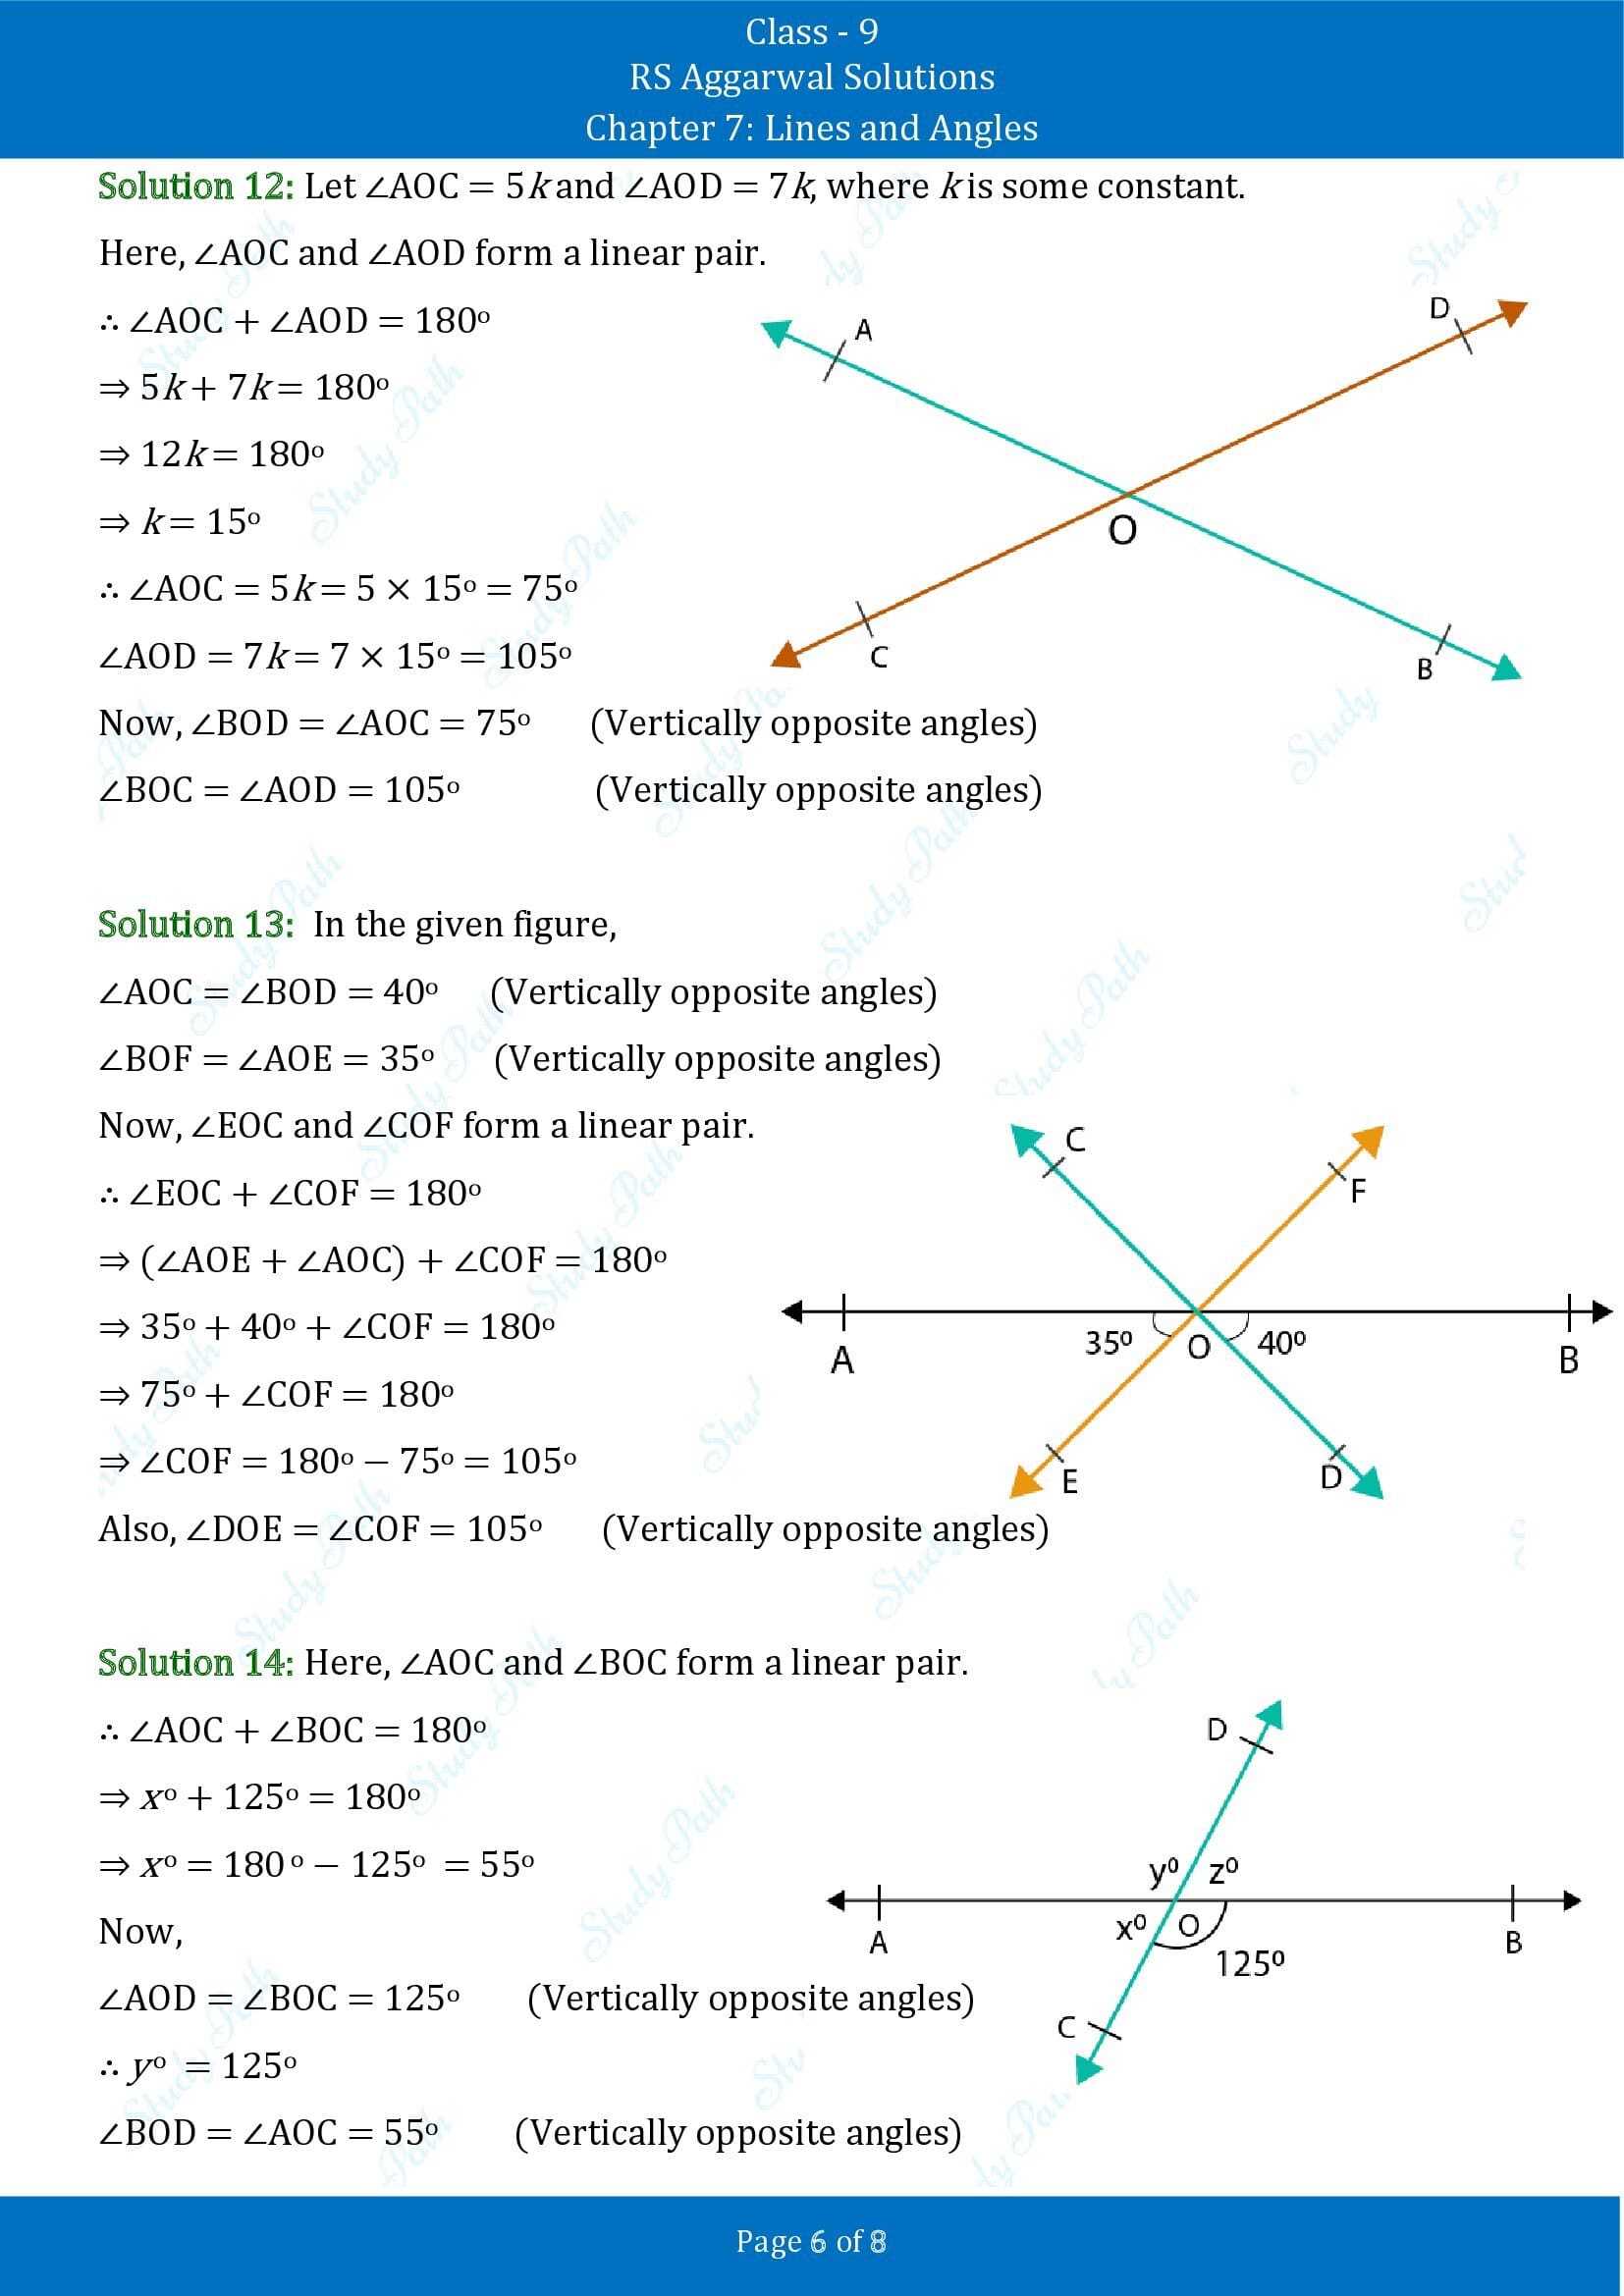 RS Aggarwal Solutions Class 9 Chapter 7 Lines and Angles Exercise 7B 00006